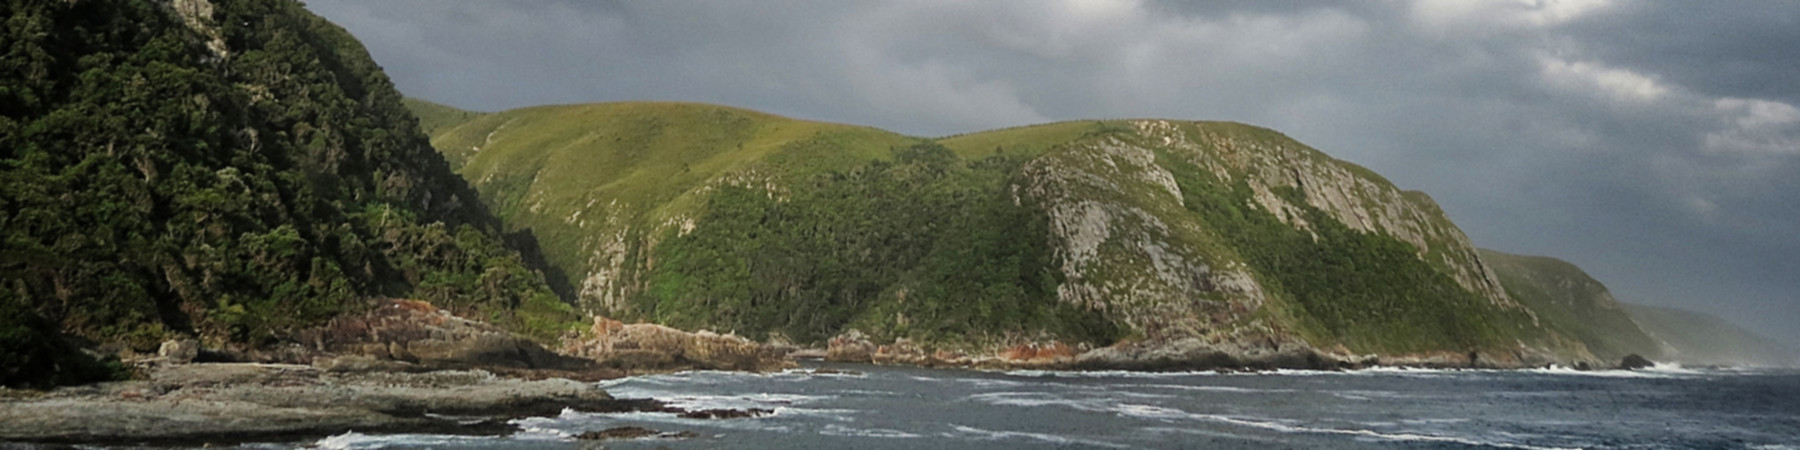 Storms River Banner